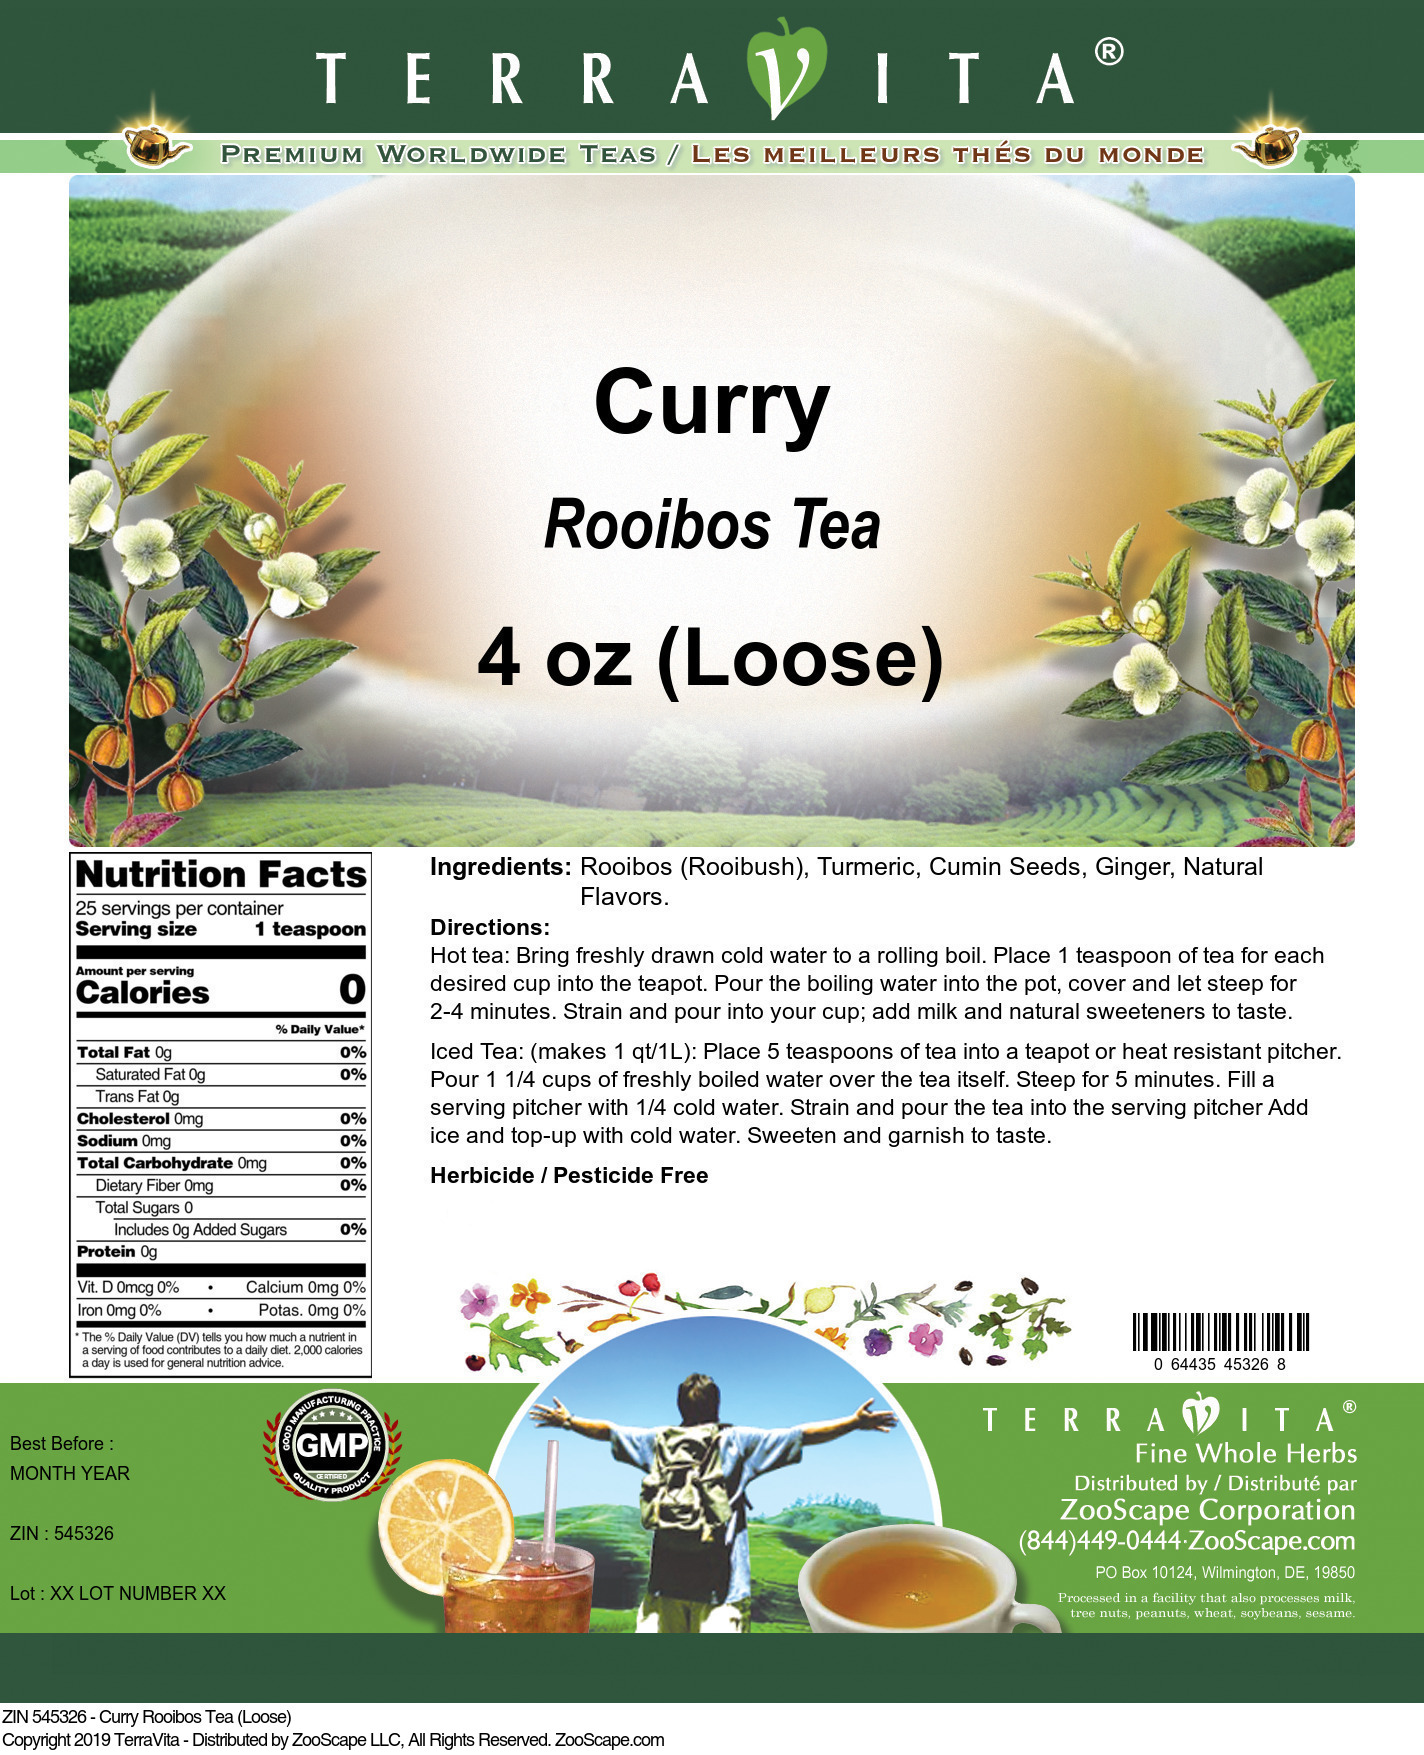 Curry Rooibos Tea (Loose) - Label